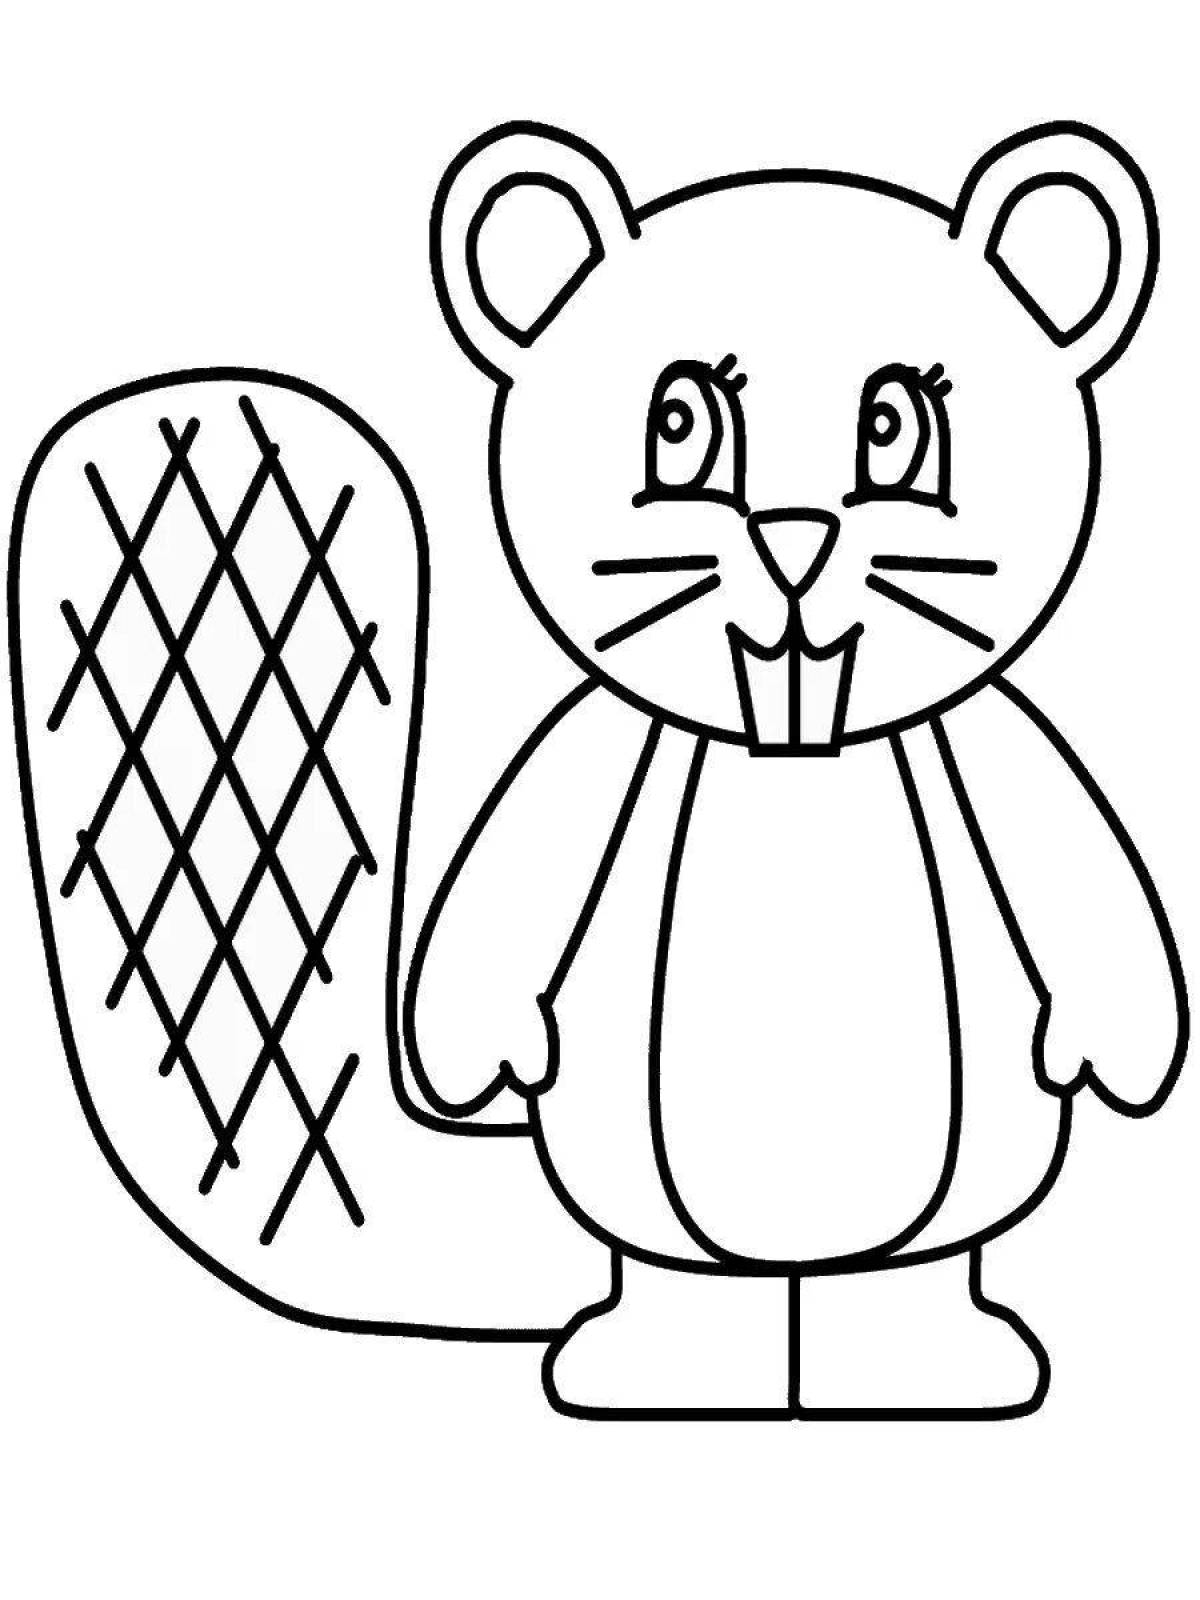 Great beaver coloring book for kids